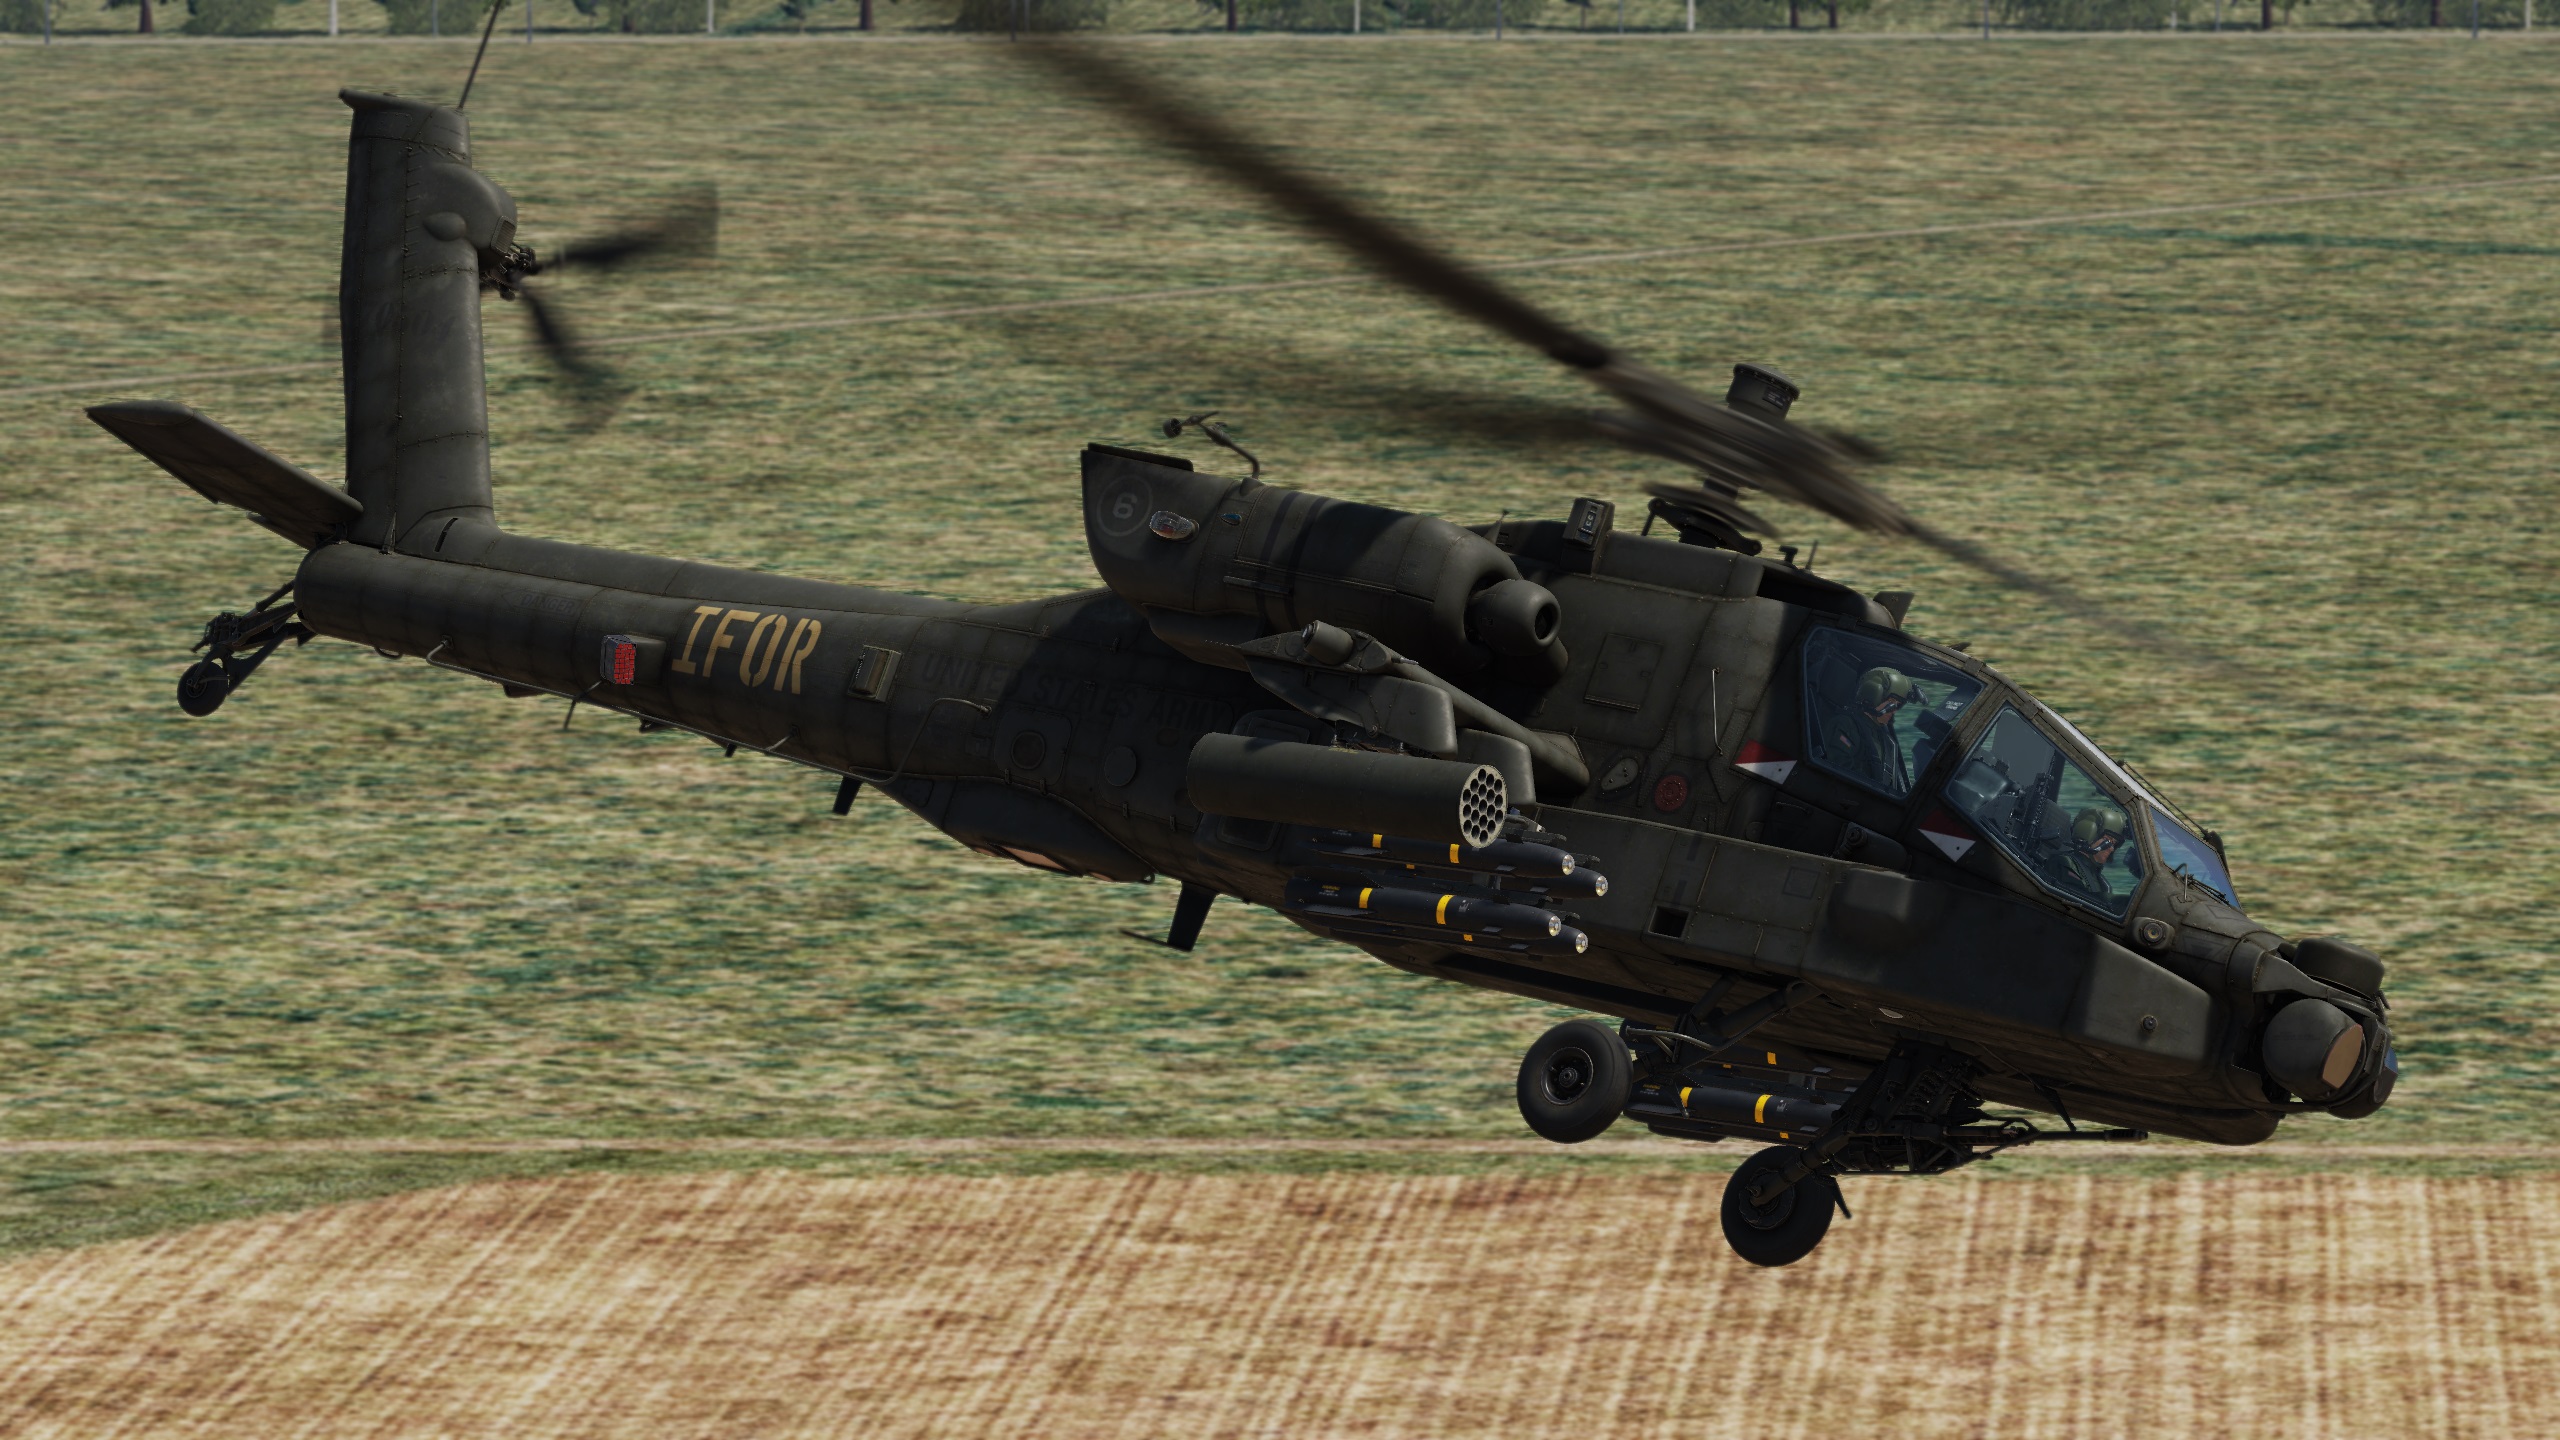 SKIN AH-64D- IFOR  (Bosnia) US Army 2nd Squadron 6th Cavalry